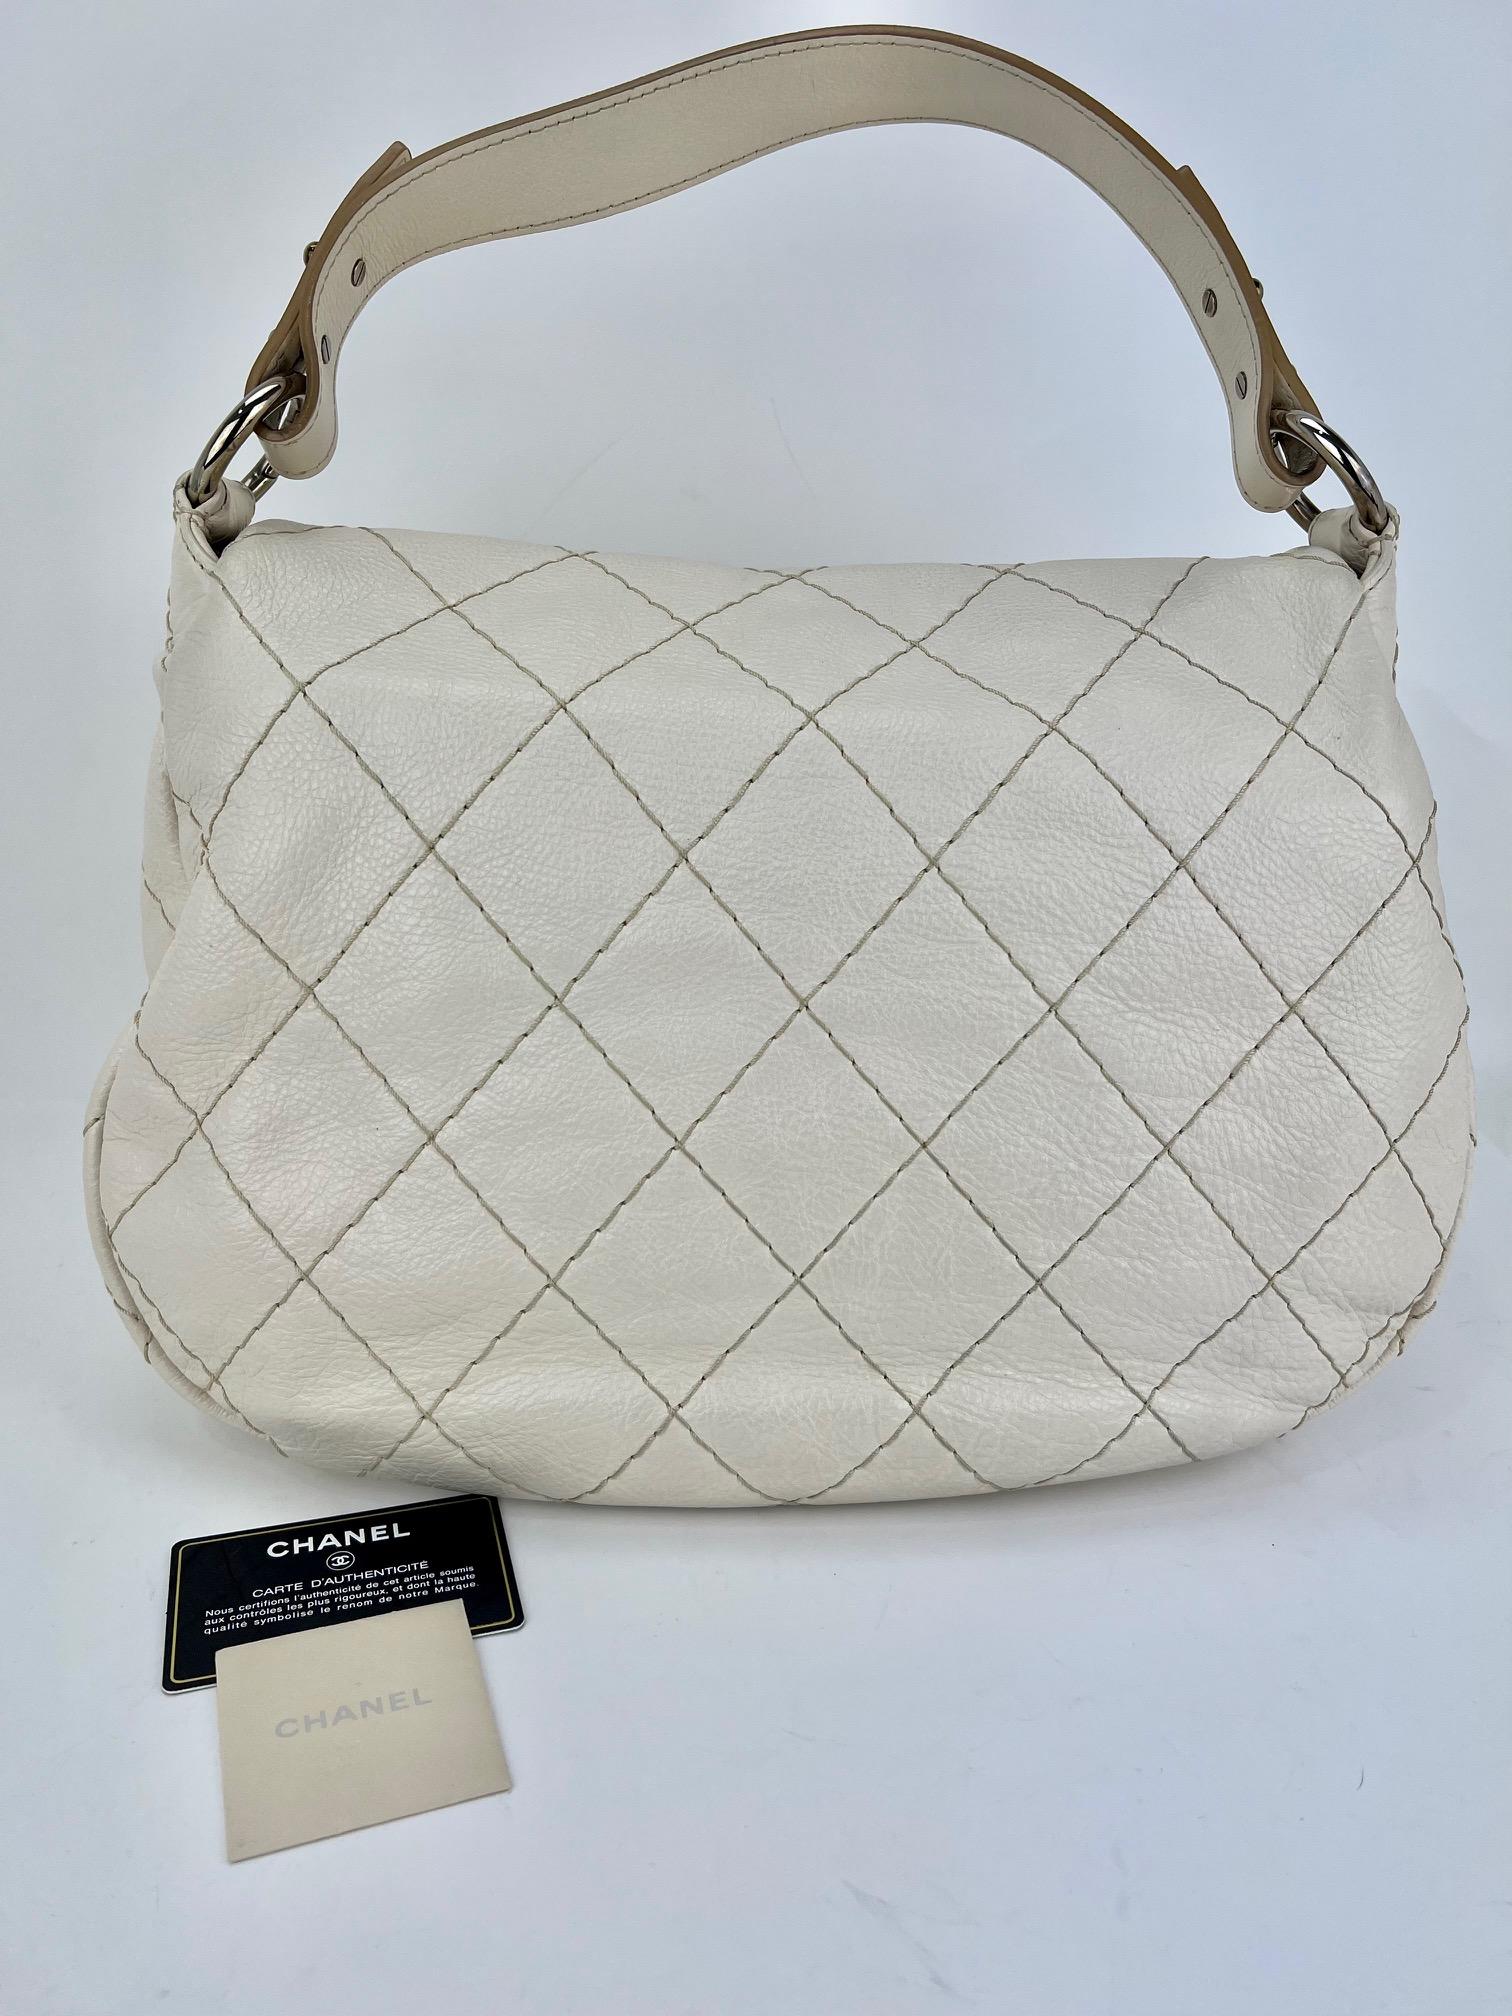 Pre-Owned  100% Authentic
CHANEL Glazed Calfskin White Stitched XL on the road
Flap Added Insert to help Organize and Keep Shape
RATING: A/B   very Good, well maintained,
shows minor signs of wear
MATERIAL: lambskin quilted caviar leather
HANDLE: